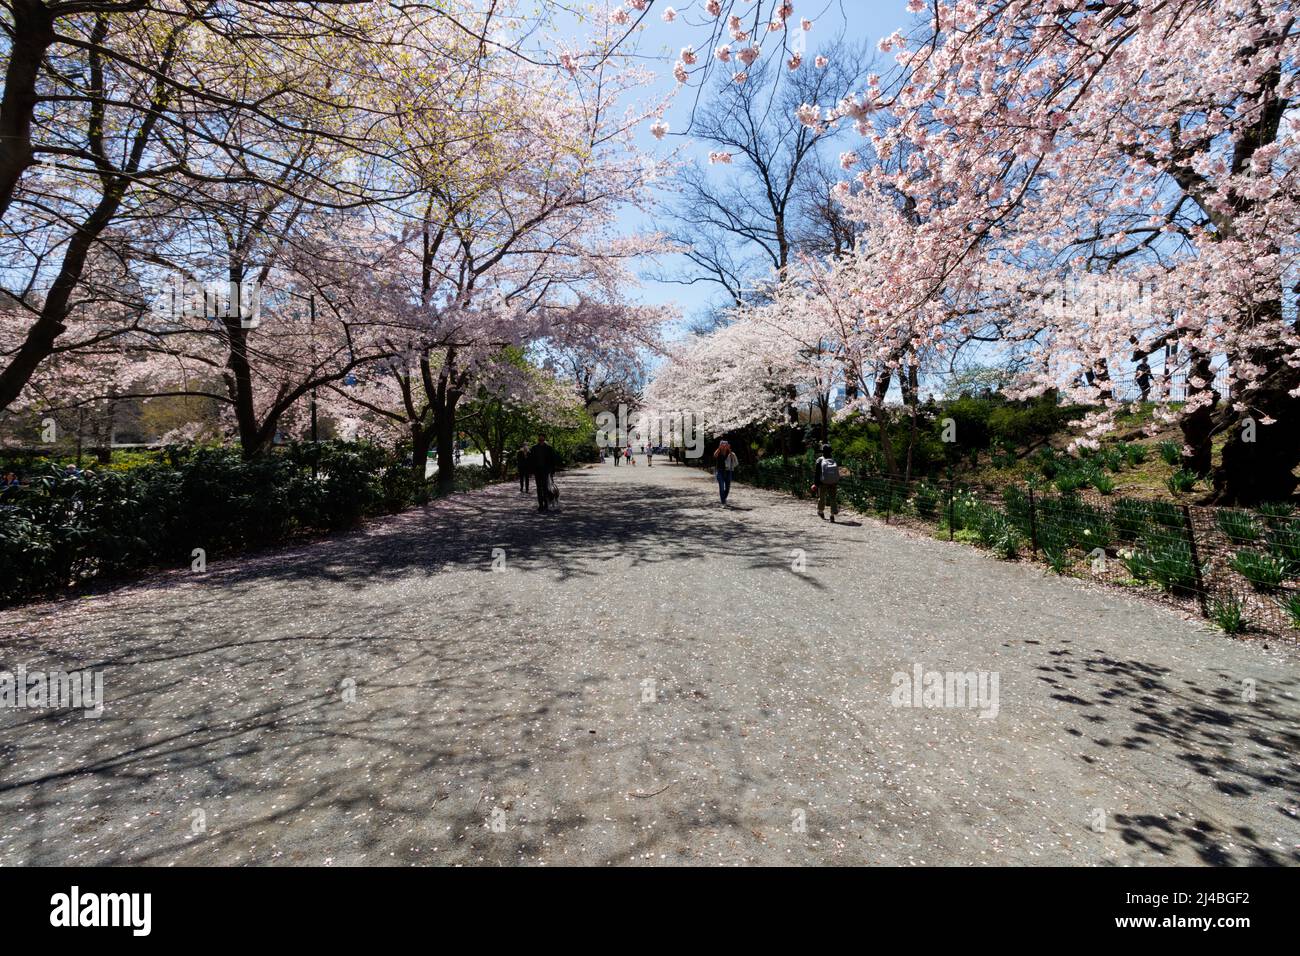 people walking along a path in Central Park, New York with cherry blossoms in full bloom arching over on a Spring day Stock Photo